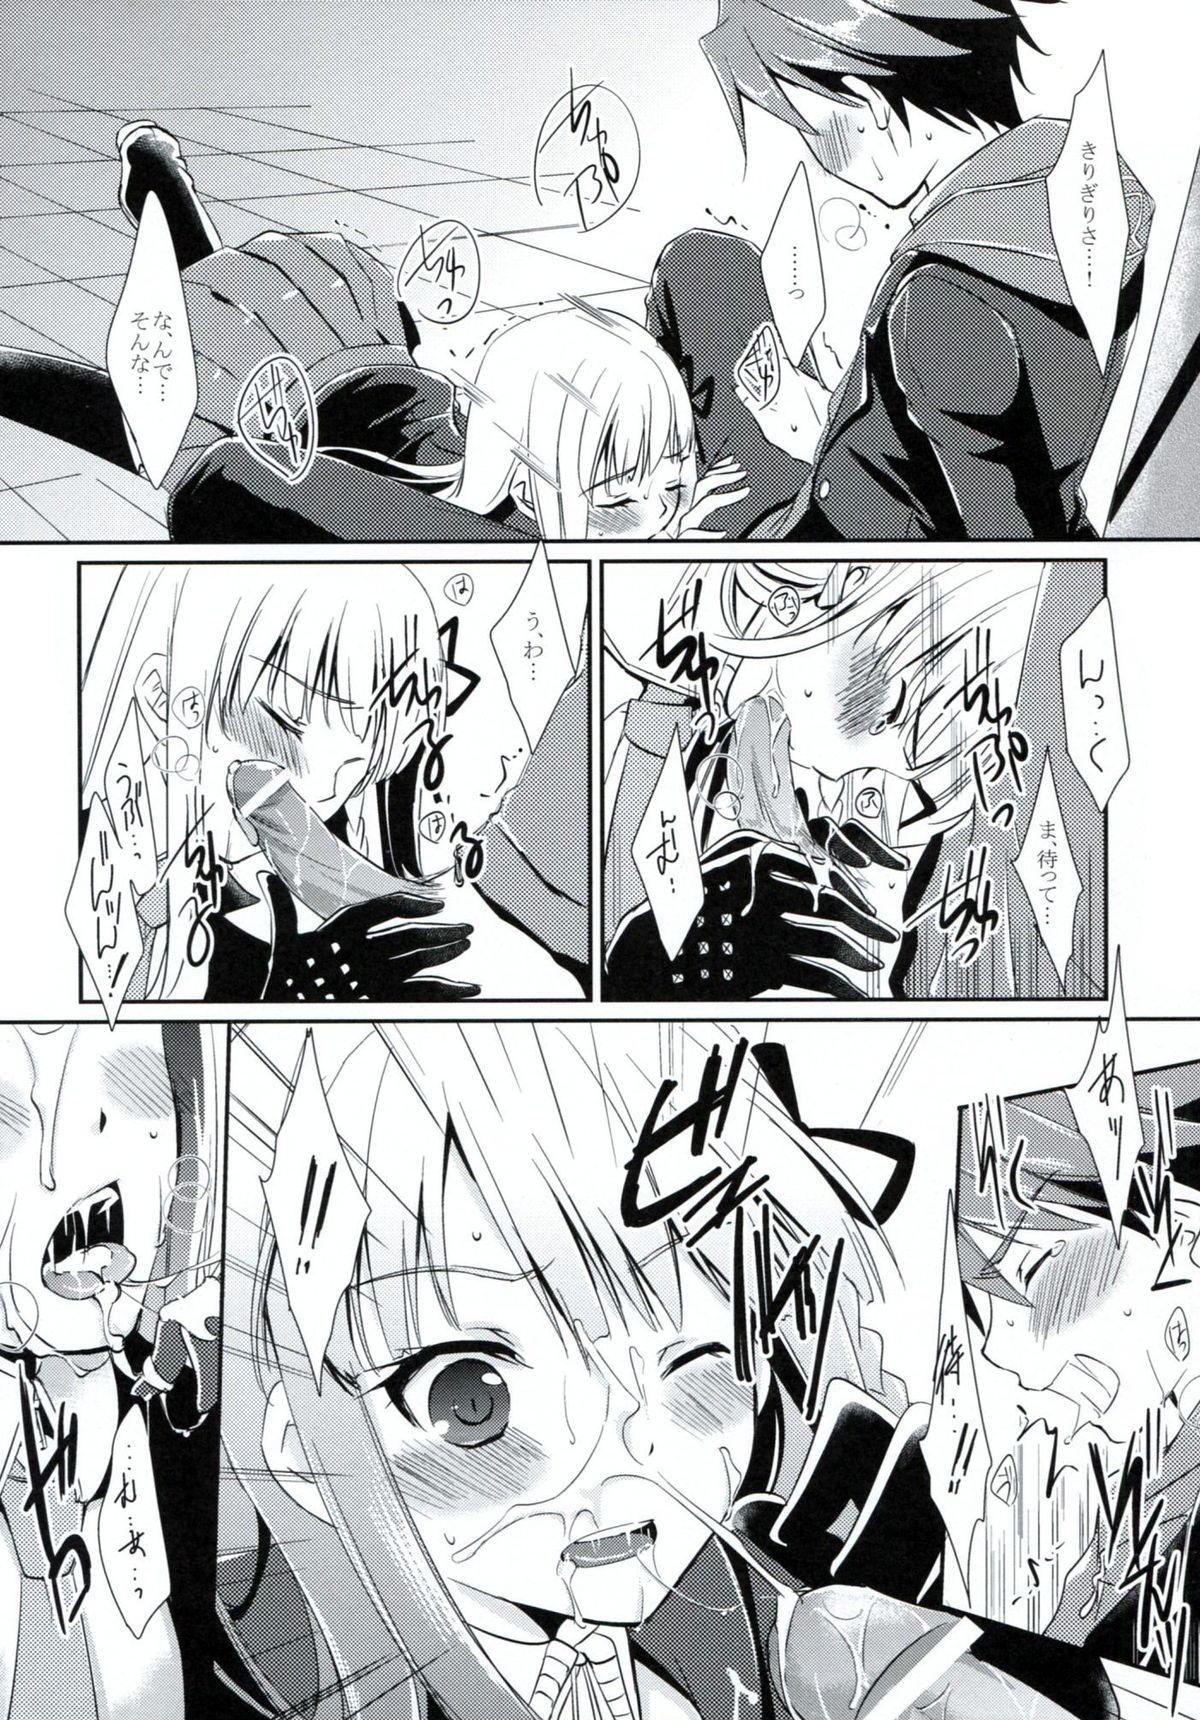 Real Amature Porn Synchronicity - Danganronpa Free Oral Sex - Page 7